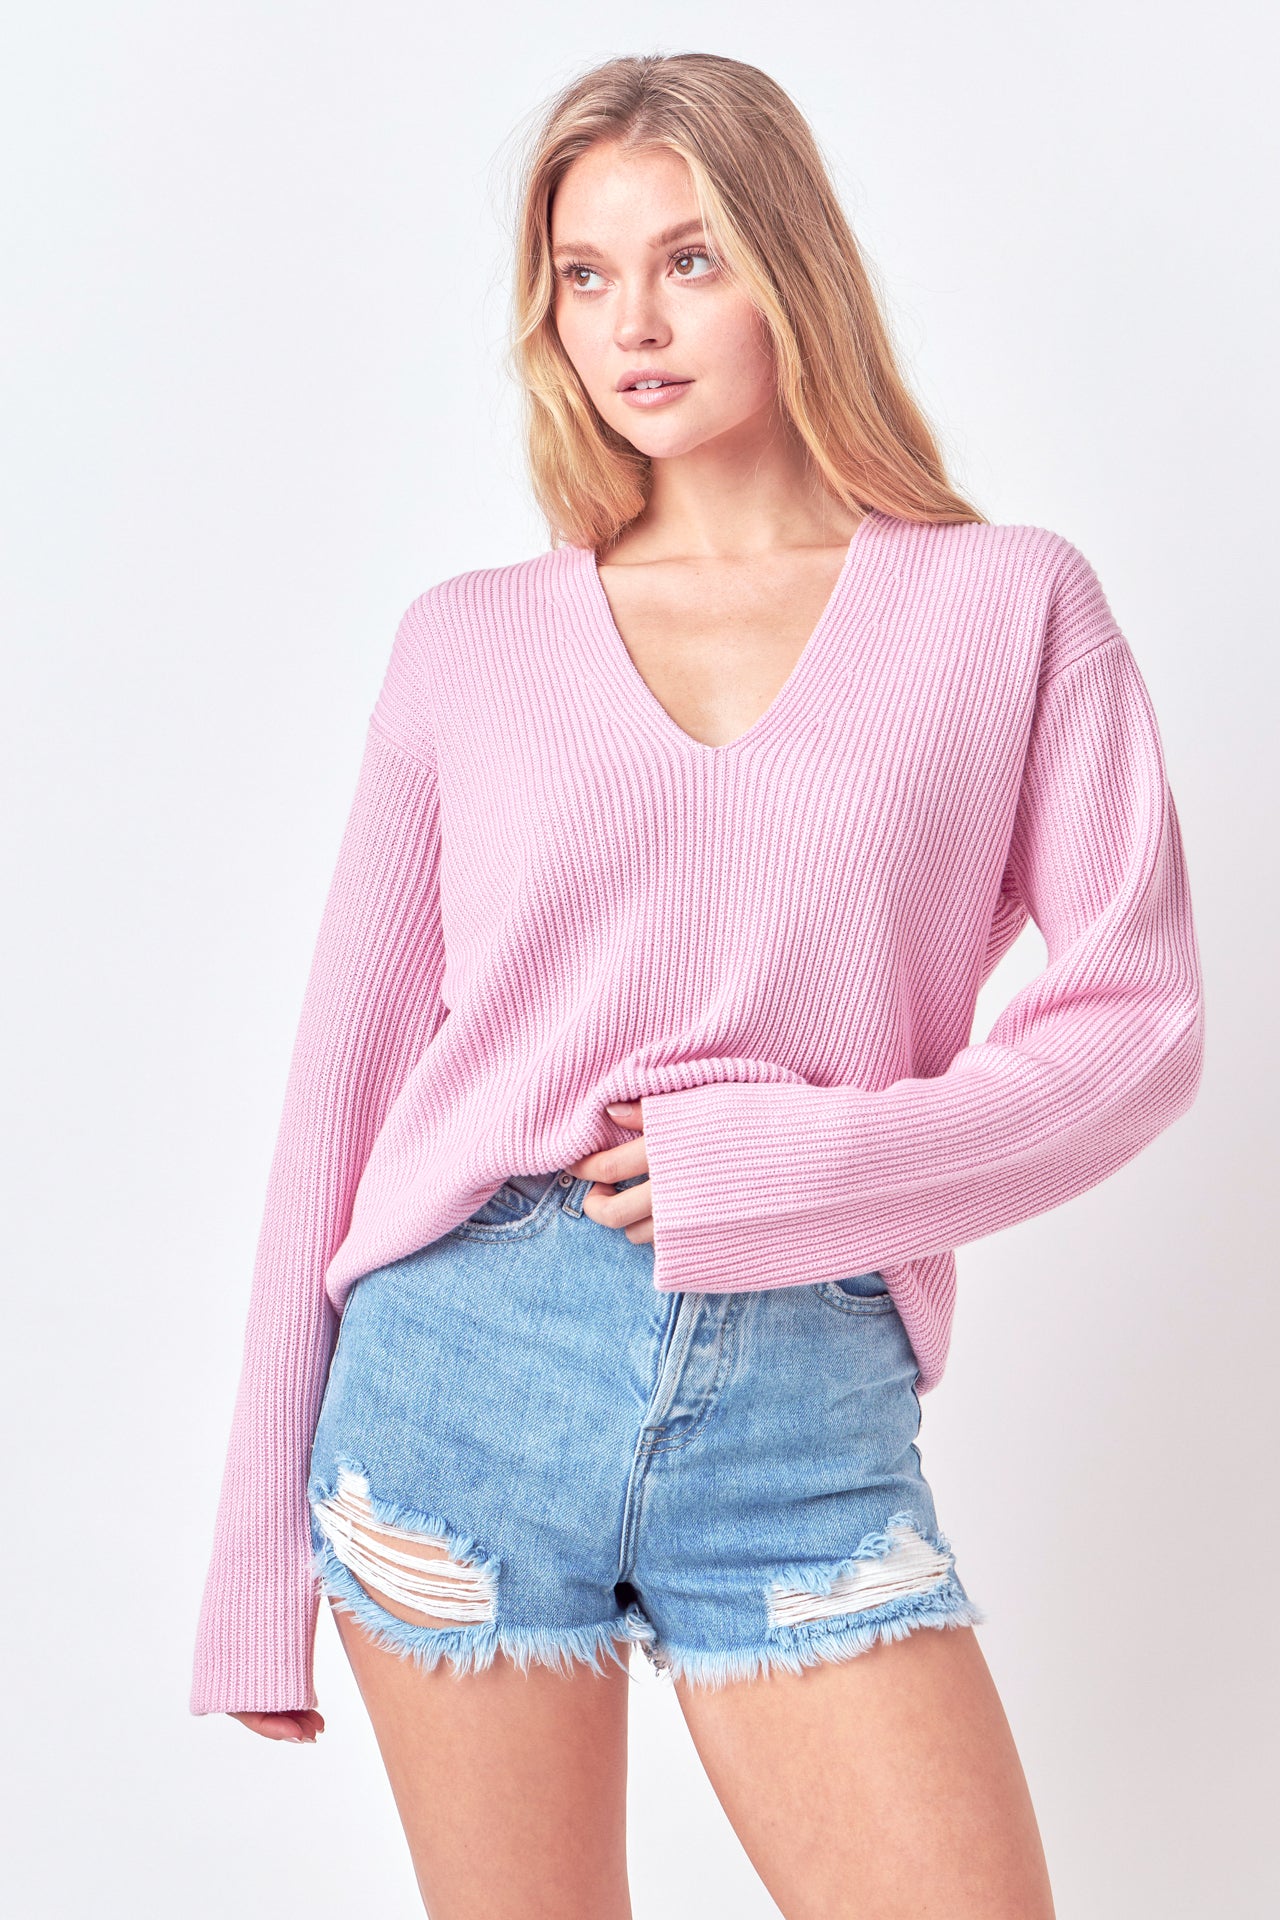 FREE THE ROSES - V-neckline Long Sleeve Sweater - SWEATERS & KNITS available at Objectrare